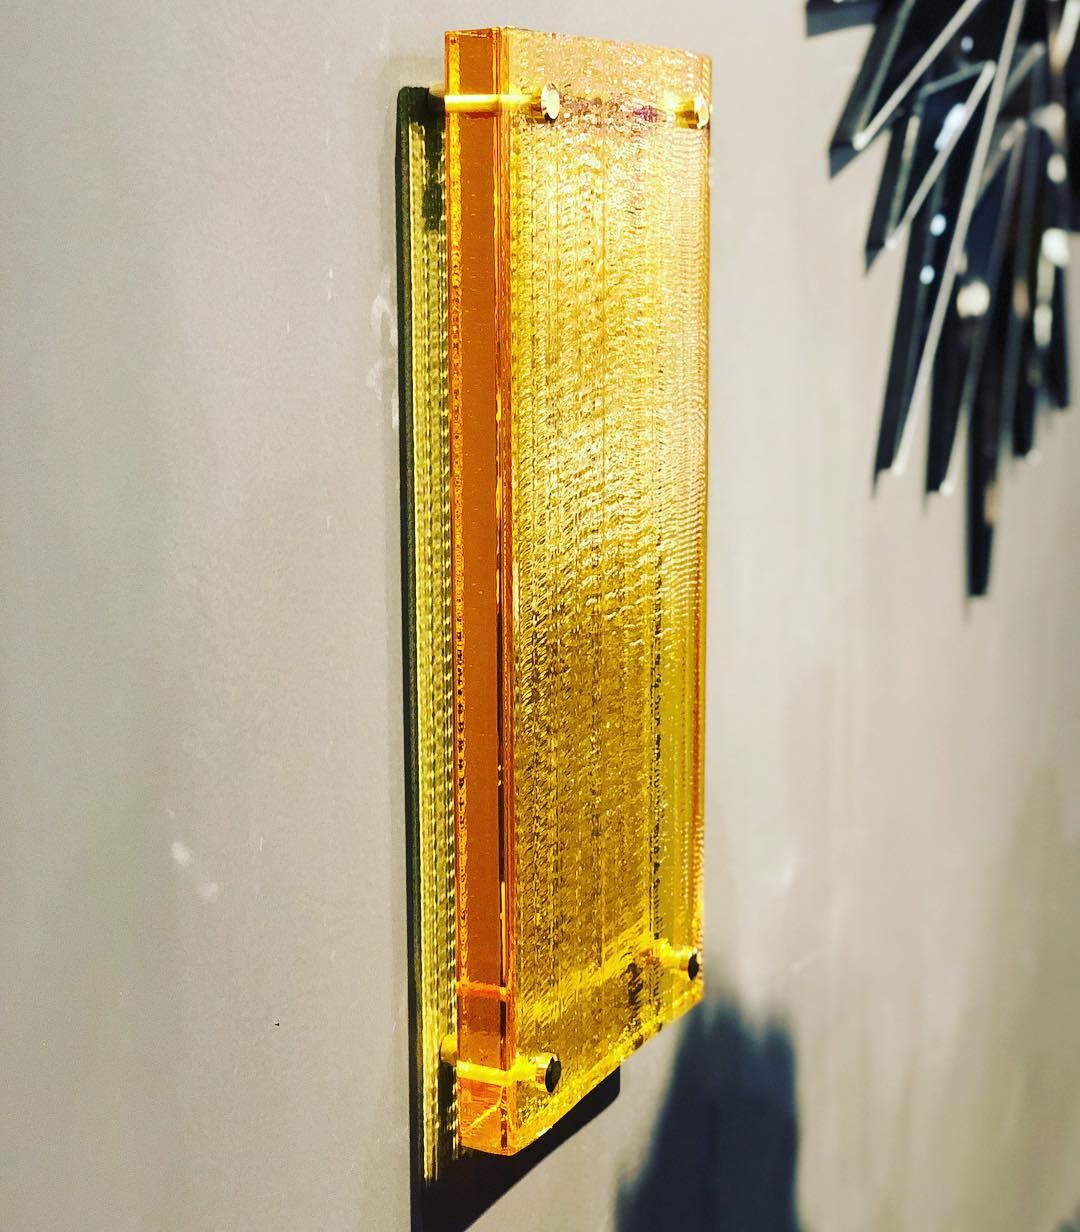 Yellow crystal wall suspension, hand-sculpted contemporary crystal
Decorative vase
Hand-sculpted in crystal
Measures: W 23, H 52, D 3 cm

A striking three-dimensional structure that transform entire environment with dazzling, abstract beams of